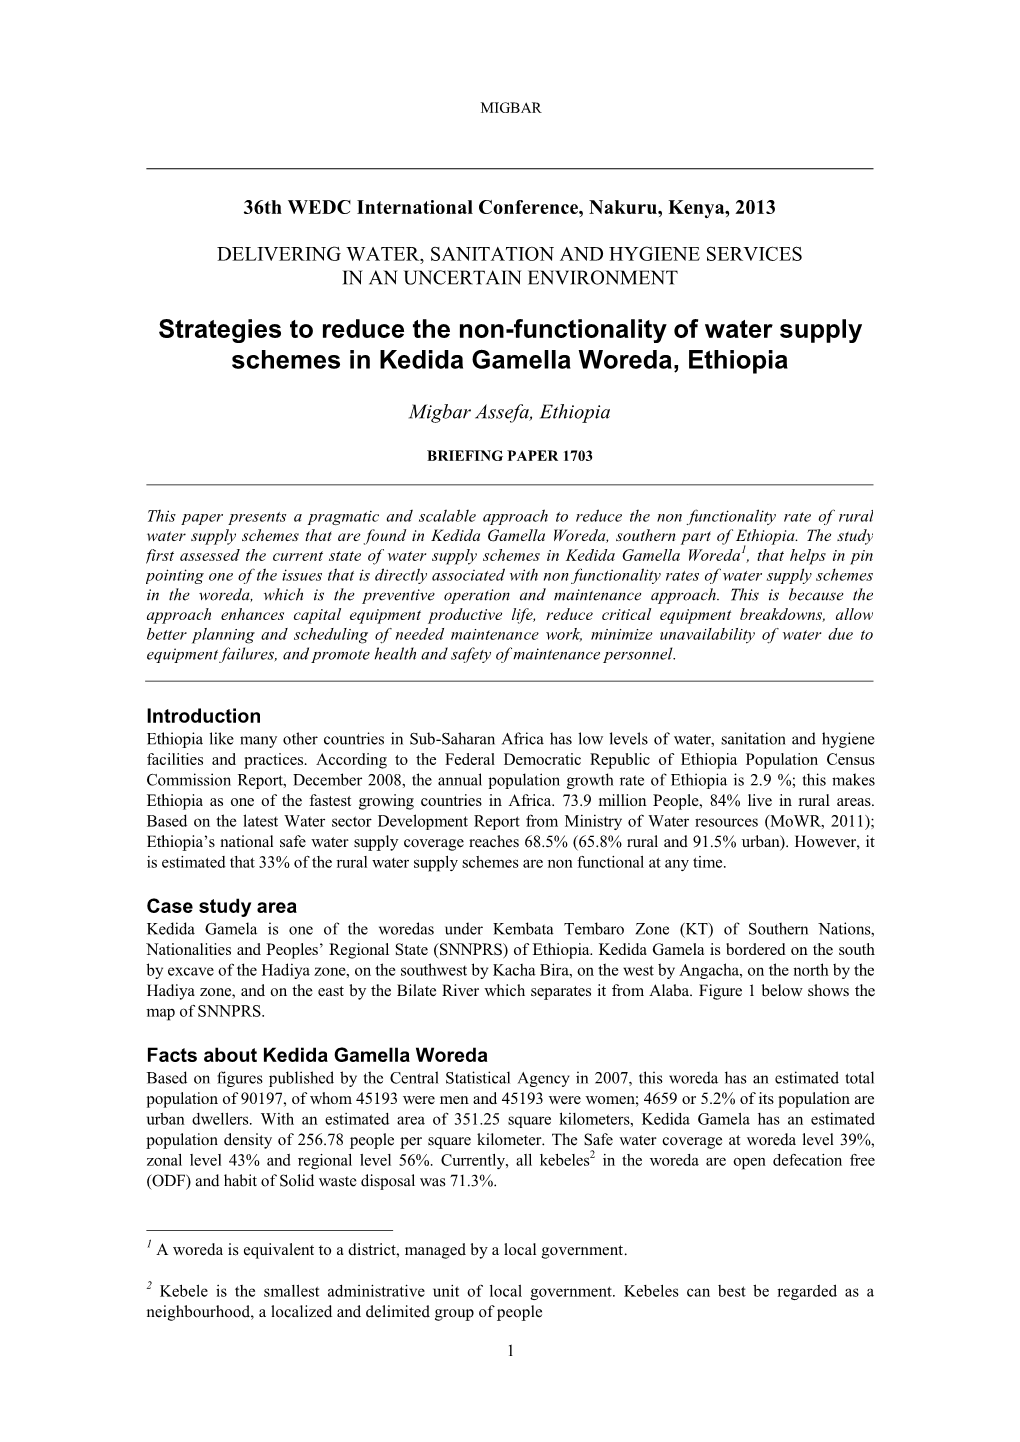 Strategies to Reduce the Non-Functionality of Water Supply Schemes in Kedida Gamella Woreda, Ethiopia